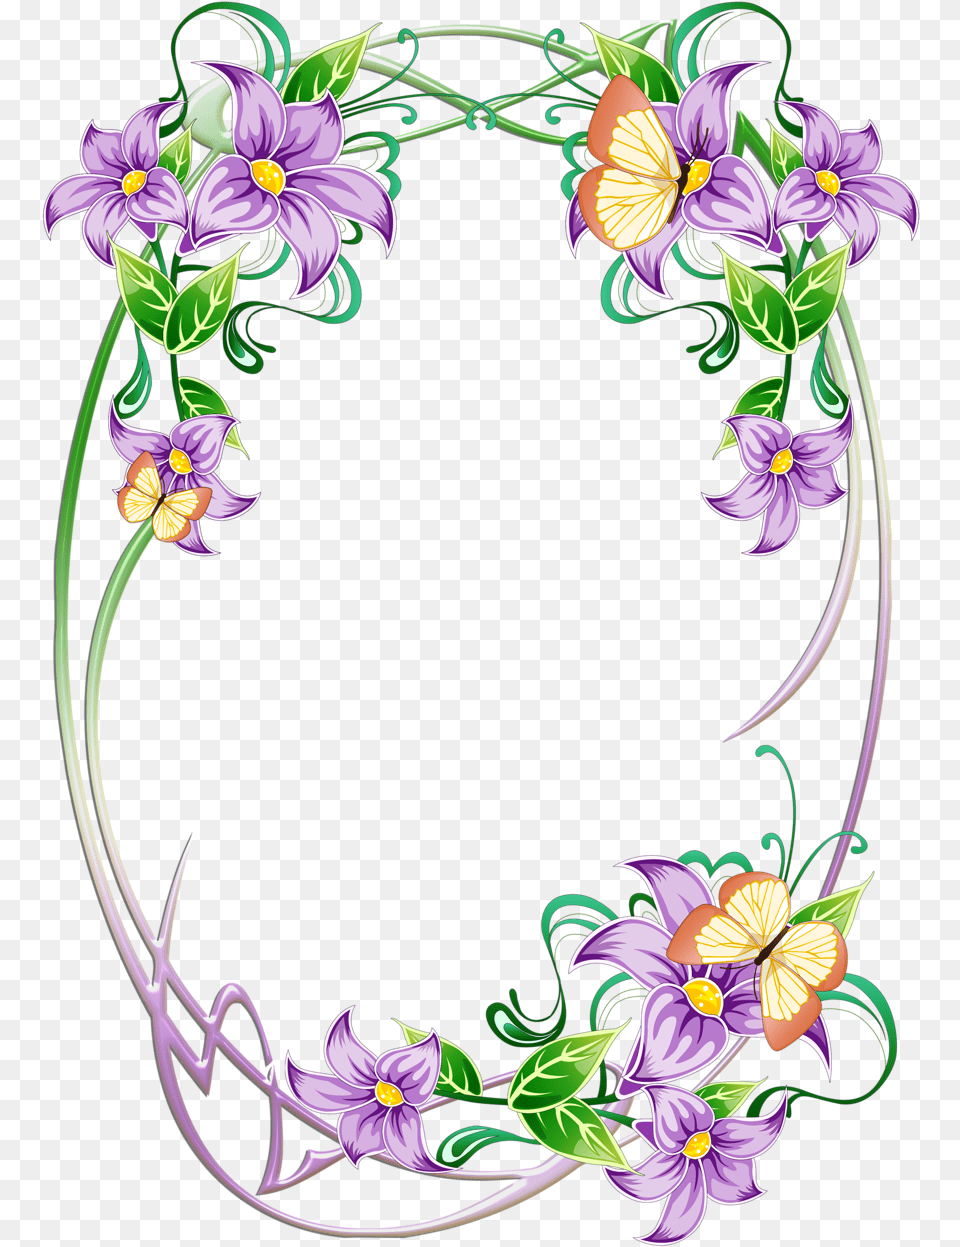 Butterfly And Flowers Border Themes, Art, Floral Design, Graphics, Pattern Png Image